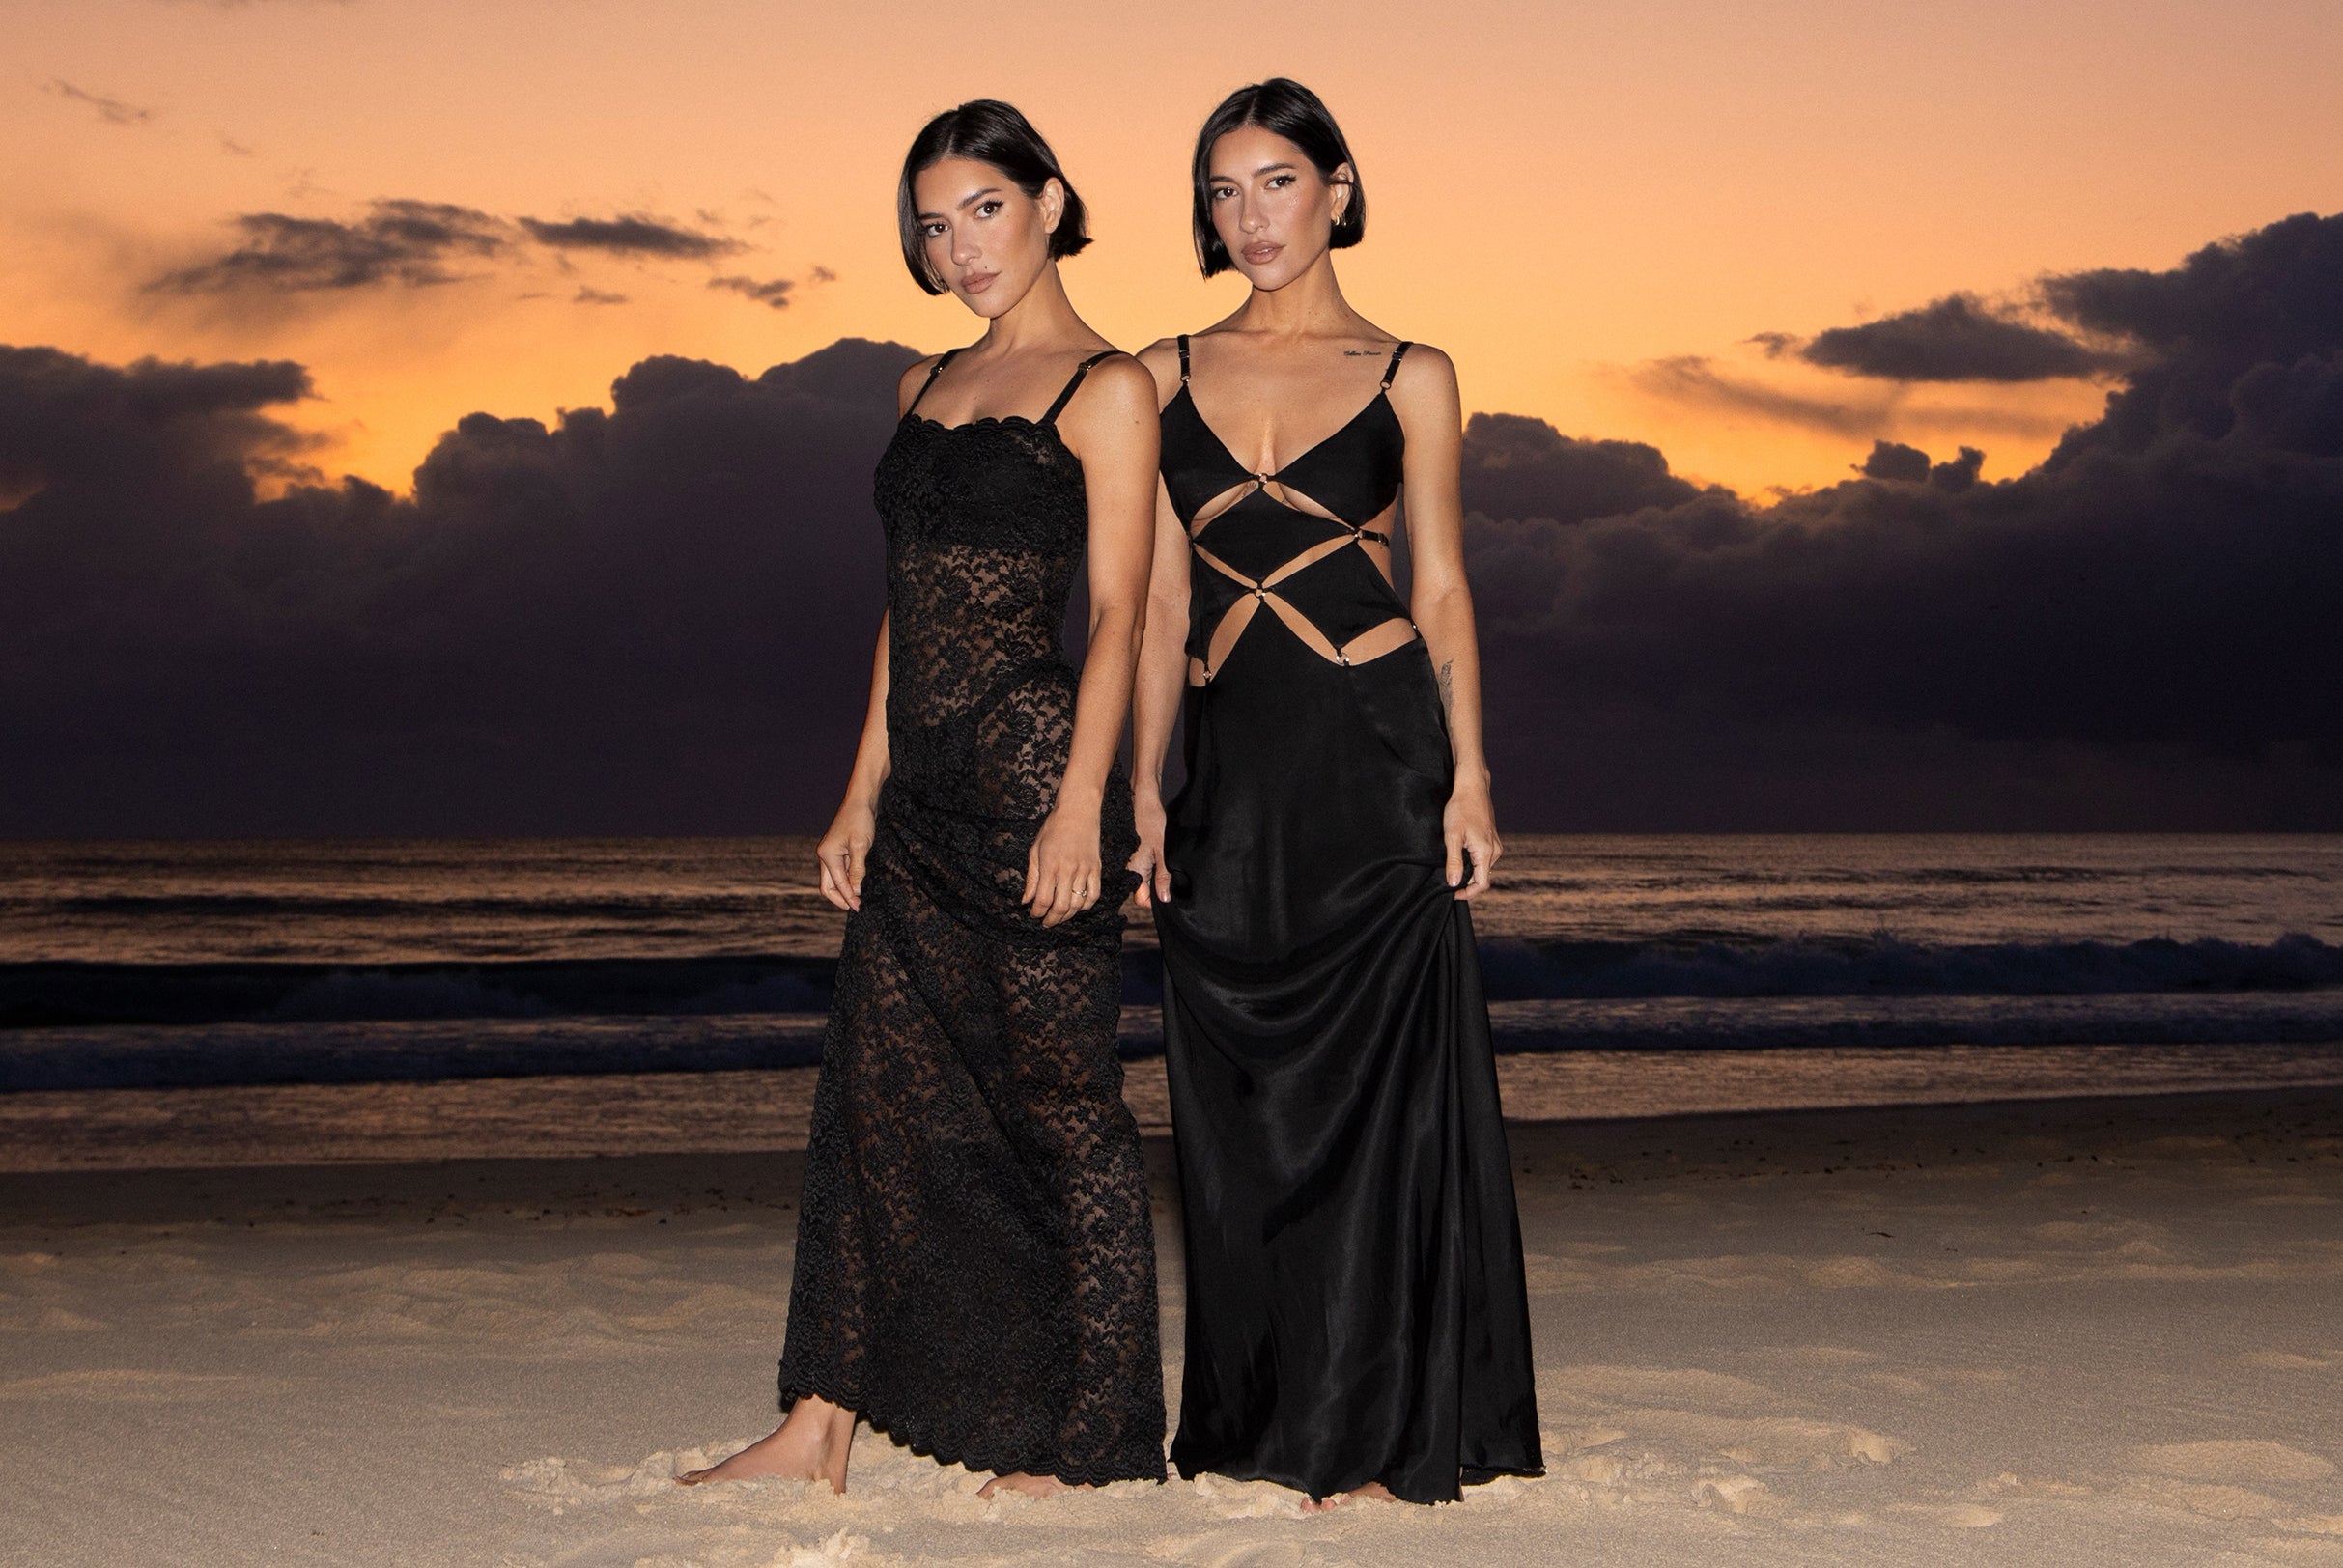 exclusive presale password to The Veronicas tickets in Ft Lauderdale at Revolution Live